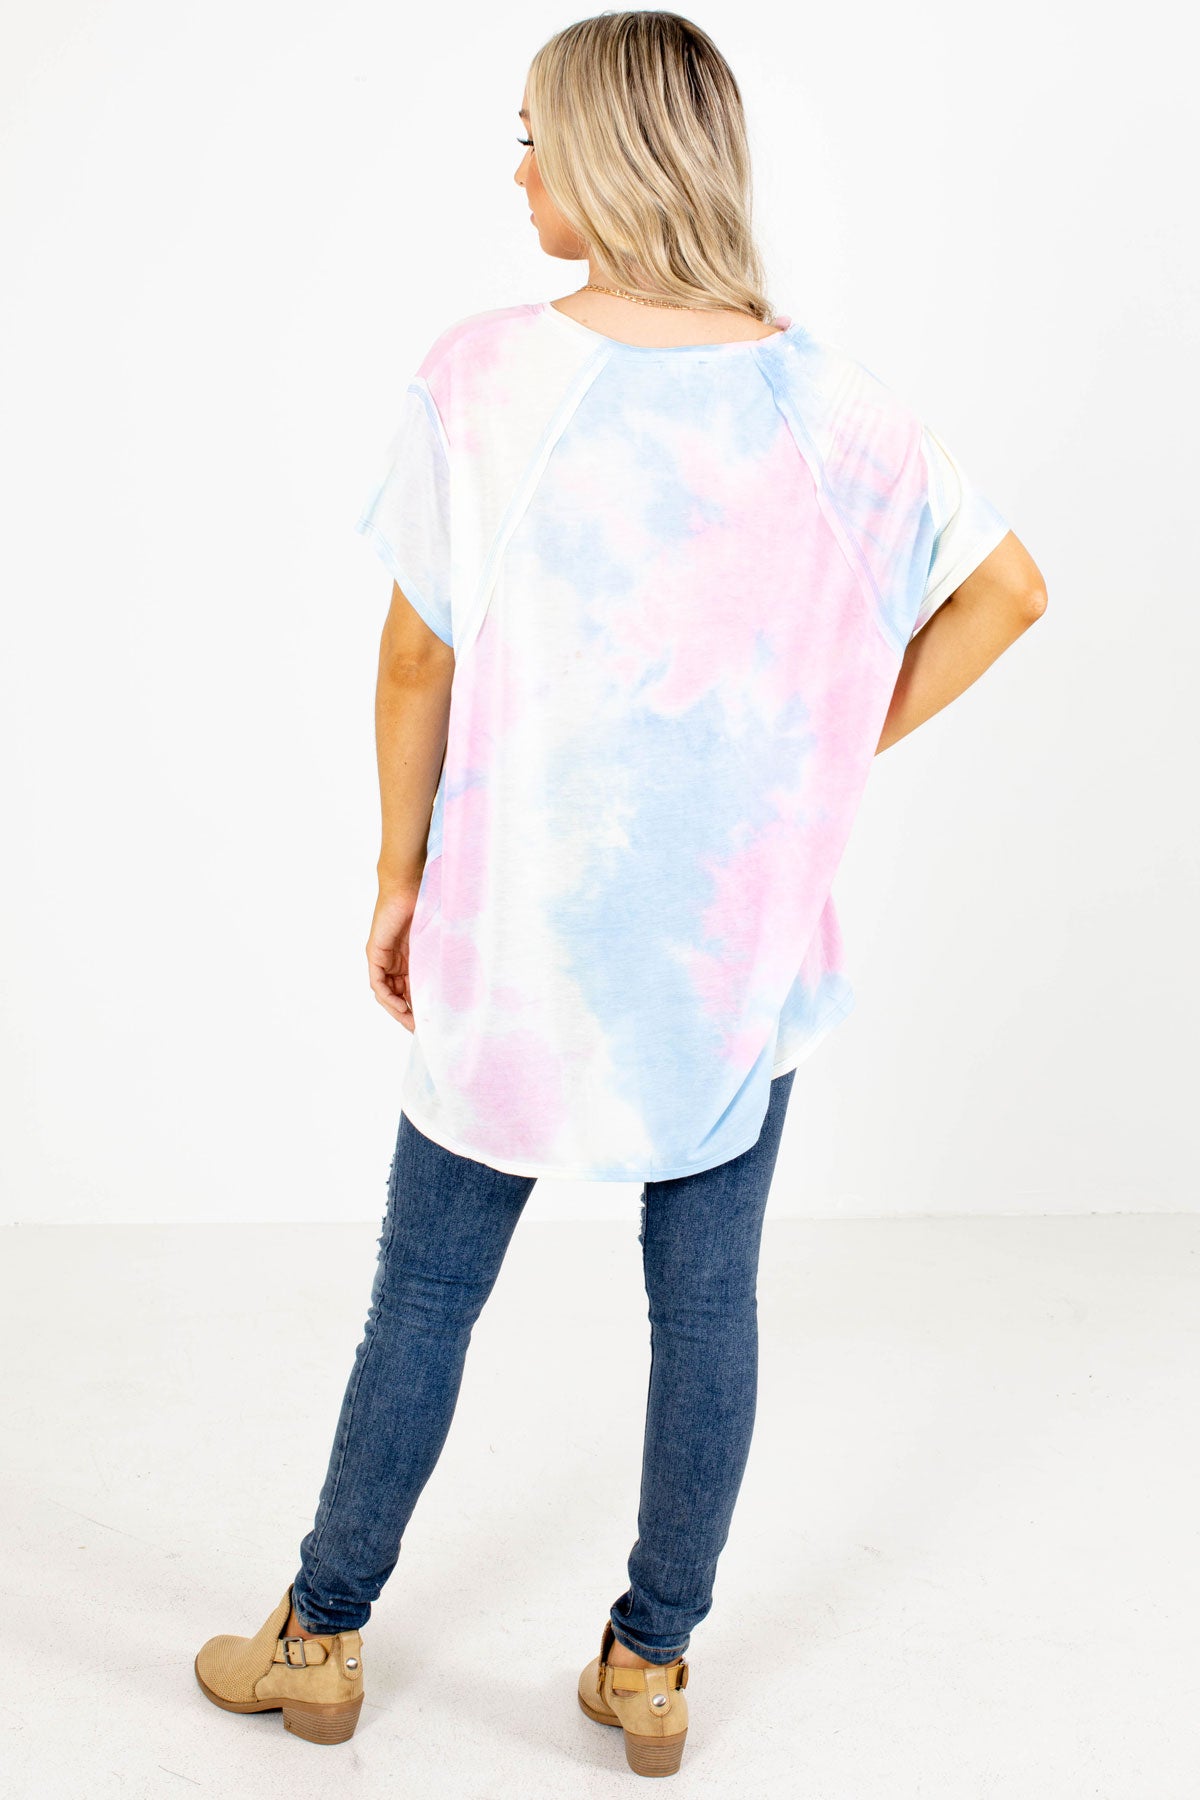 Boutique Top in Tie Dye Pink and Blue.